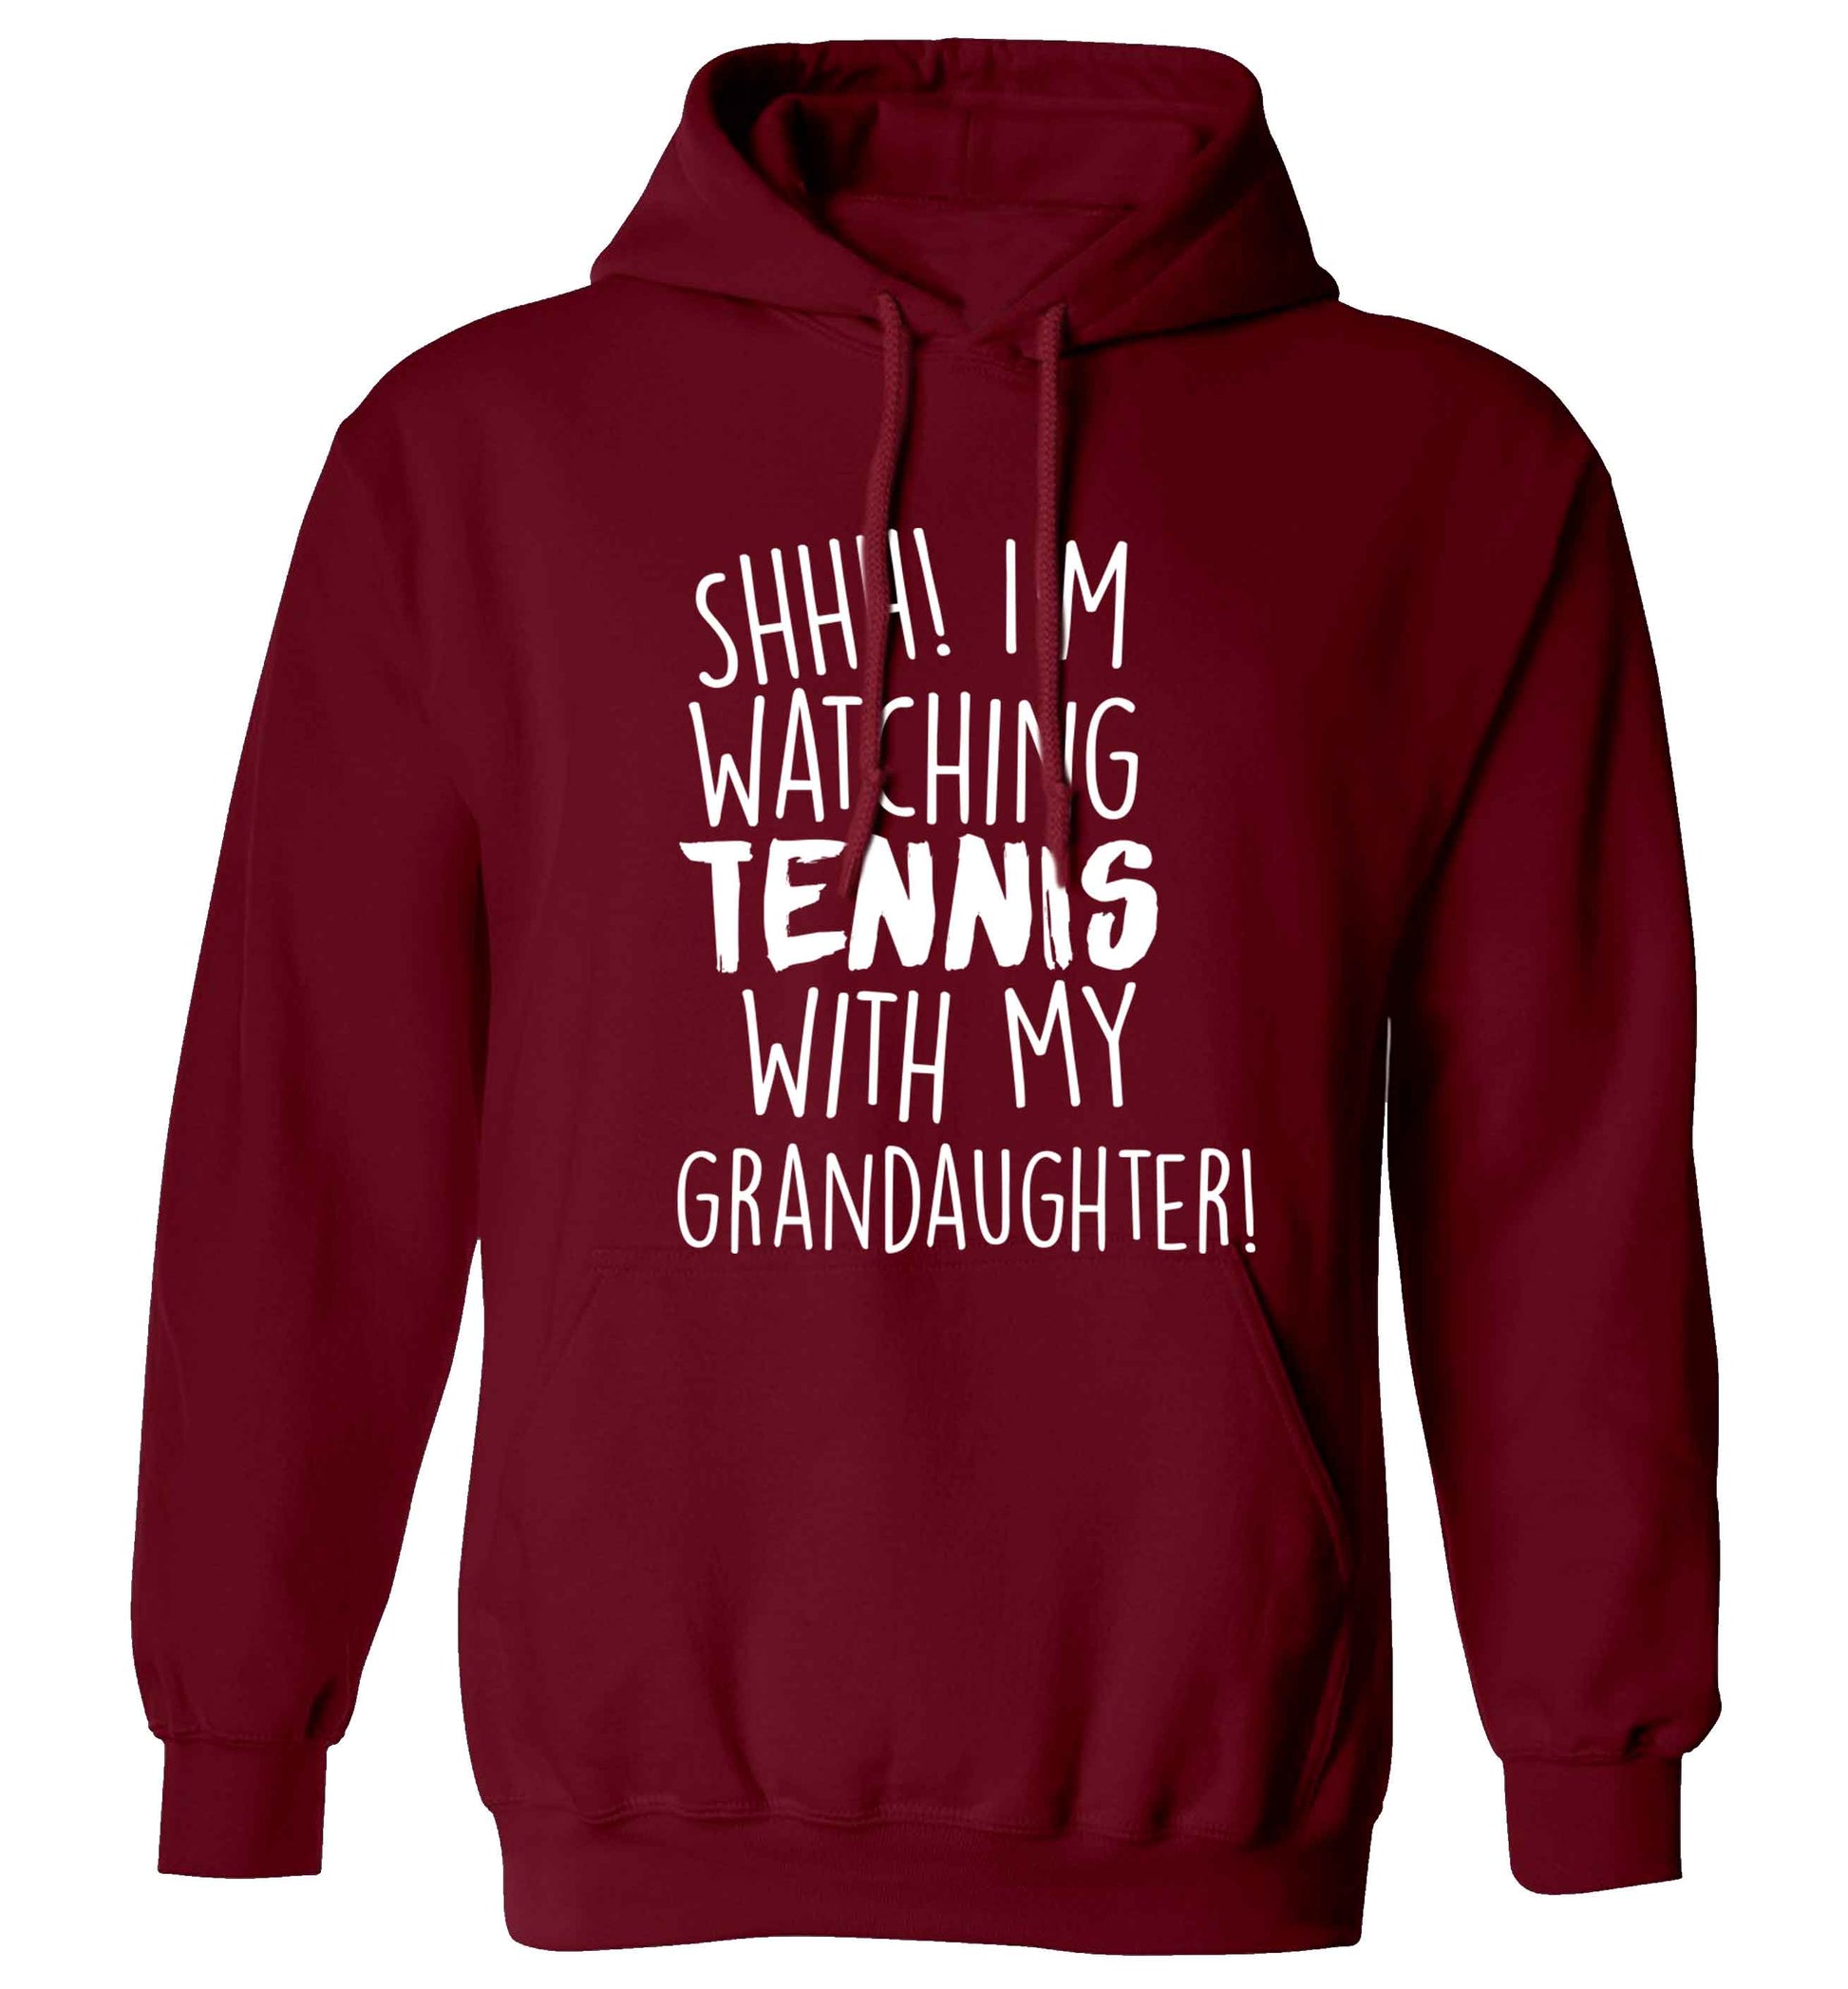 Shh! I'm watching tennis with my granddaughter! adults unisex maroon hoodie 2XL